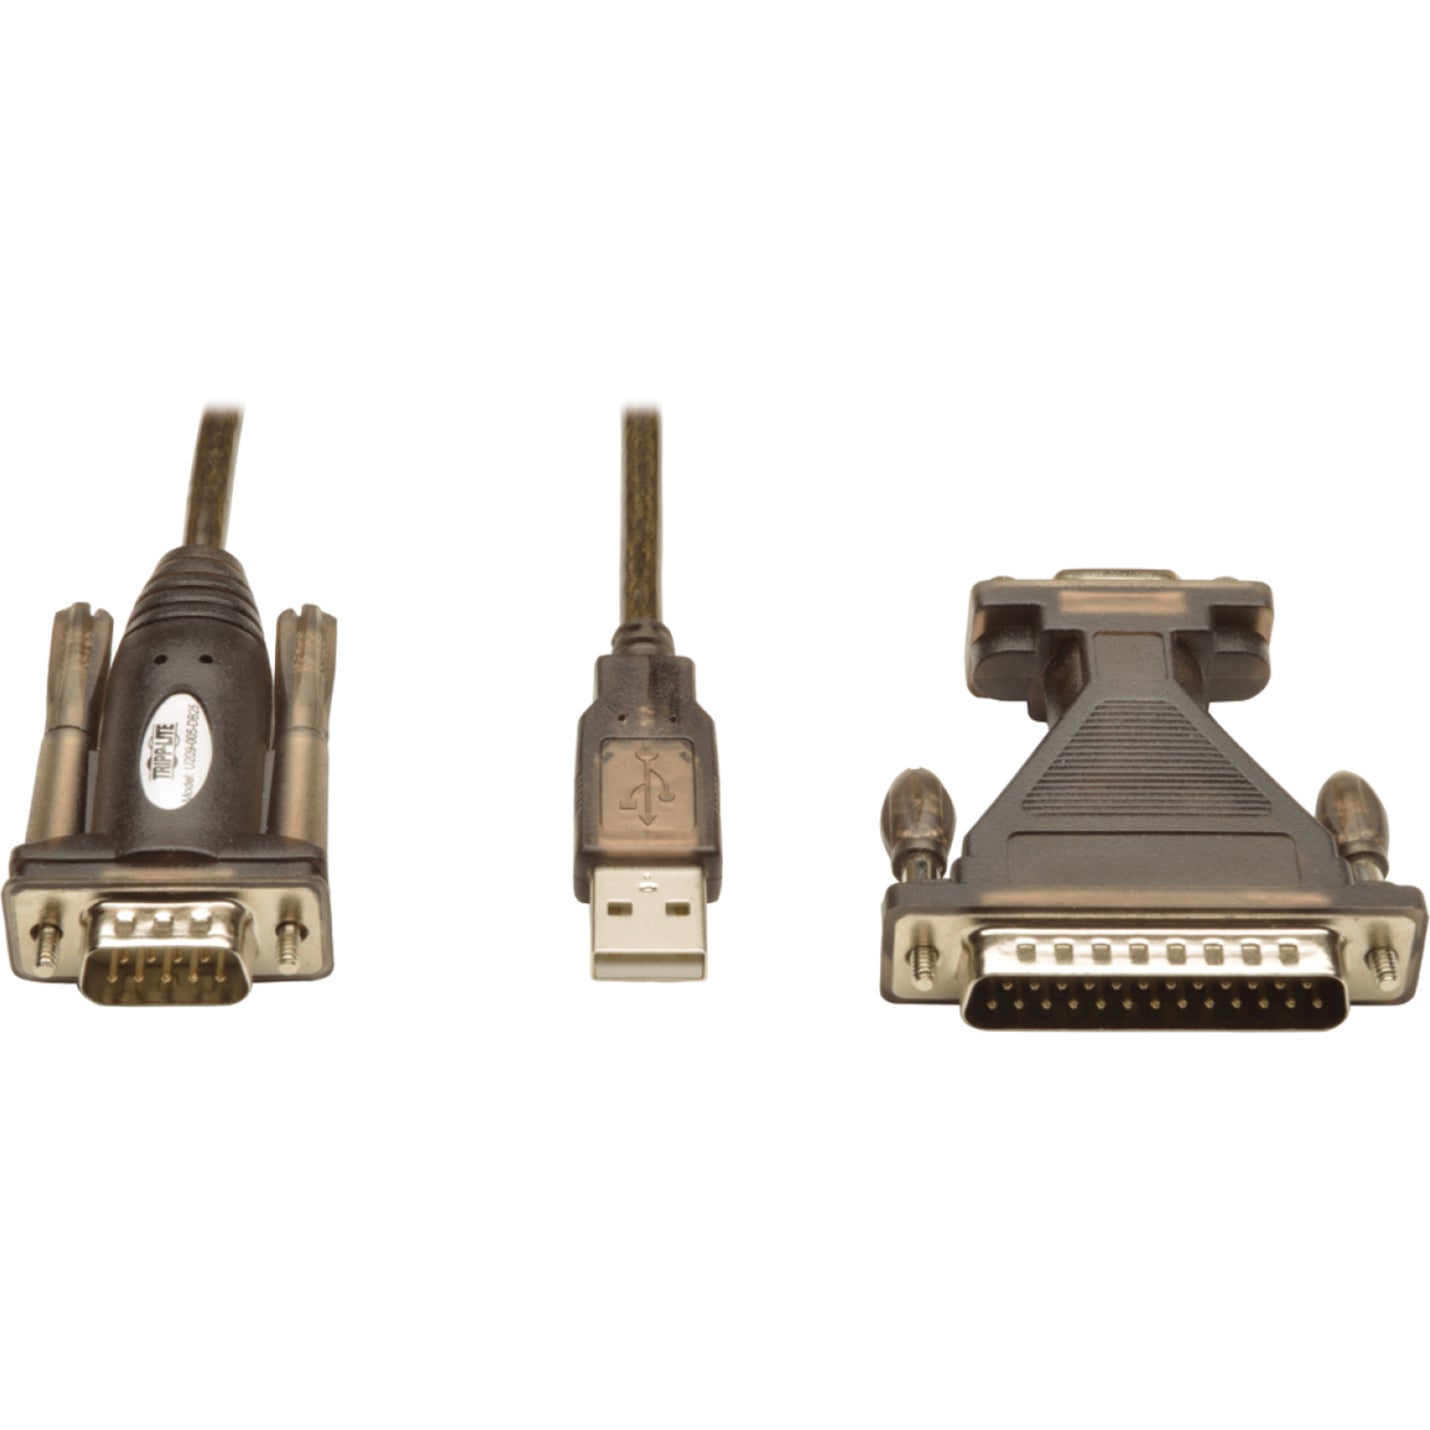 Tripp Lite U209-005-DB25 USB-to-Serial Cable Adapter (USB-A to DB25 M/M), Data Transfer Cable, 5 ft, Gold Plated Connectors, Shielded, Copper Conductor, Compatible with Tablet PC, Phone, Camera, Modem, Notebook